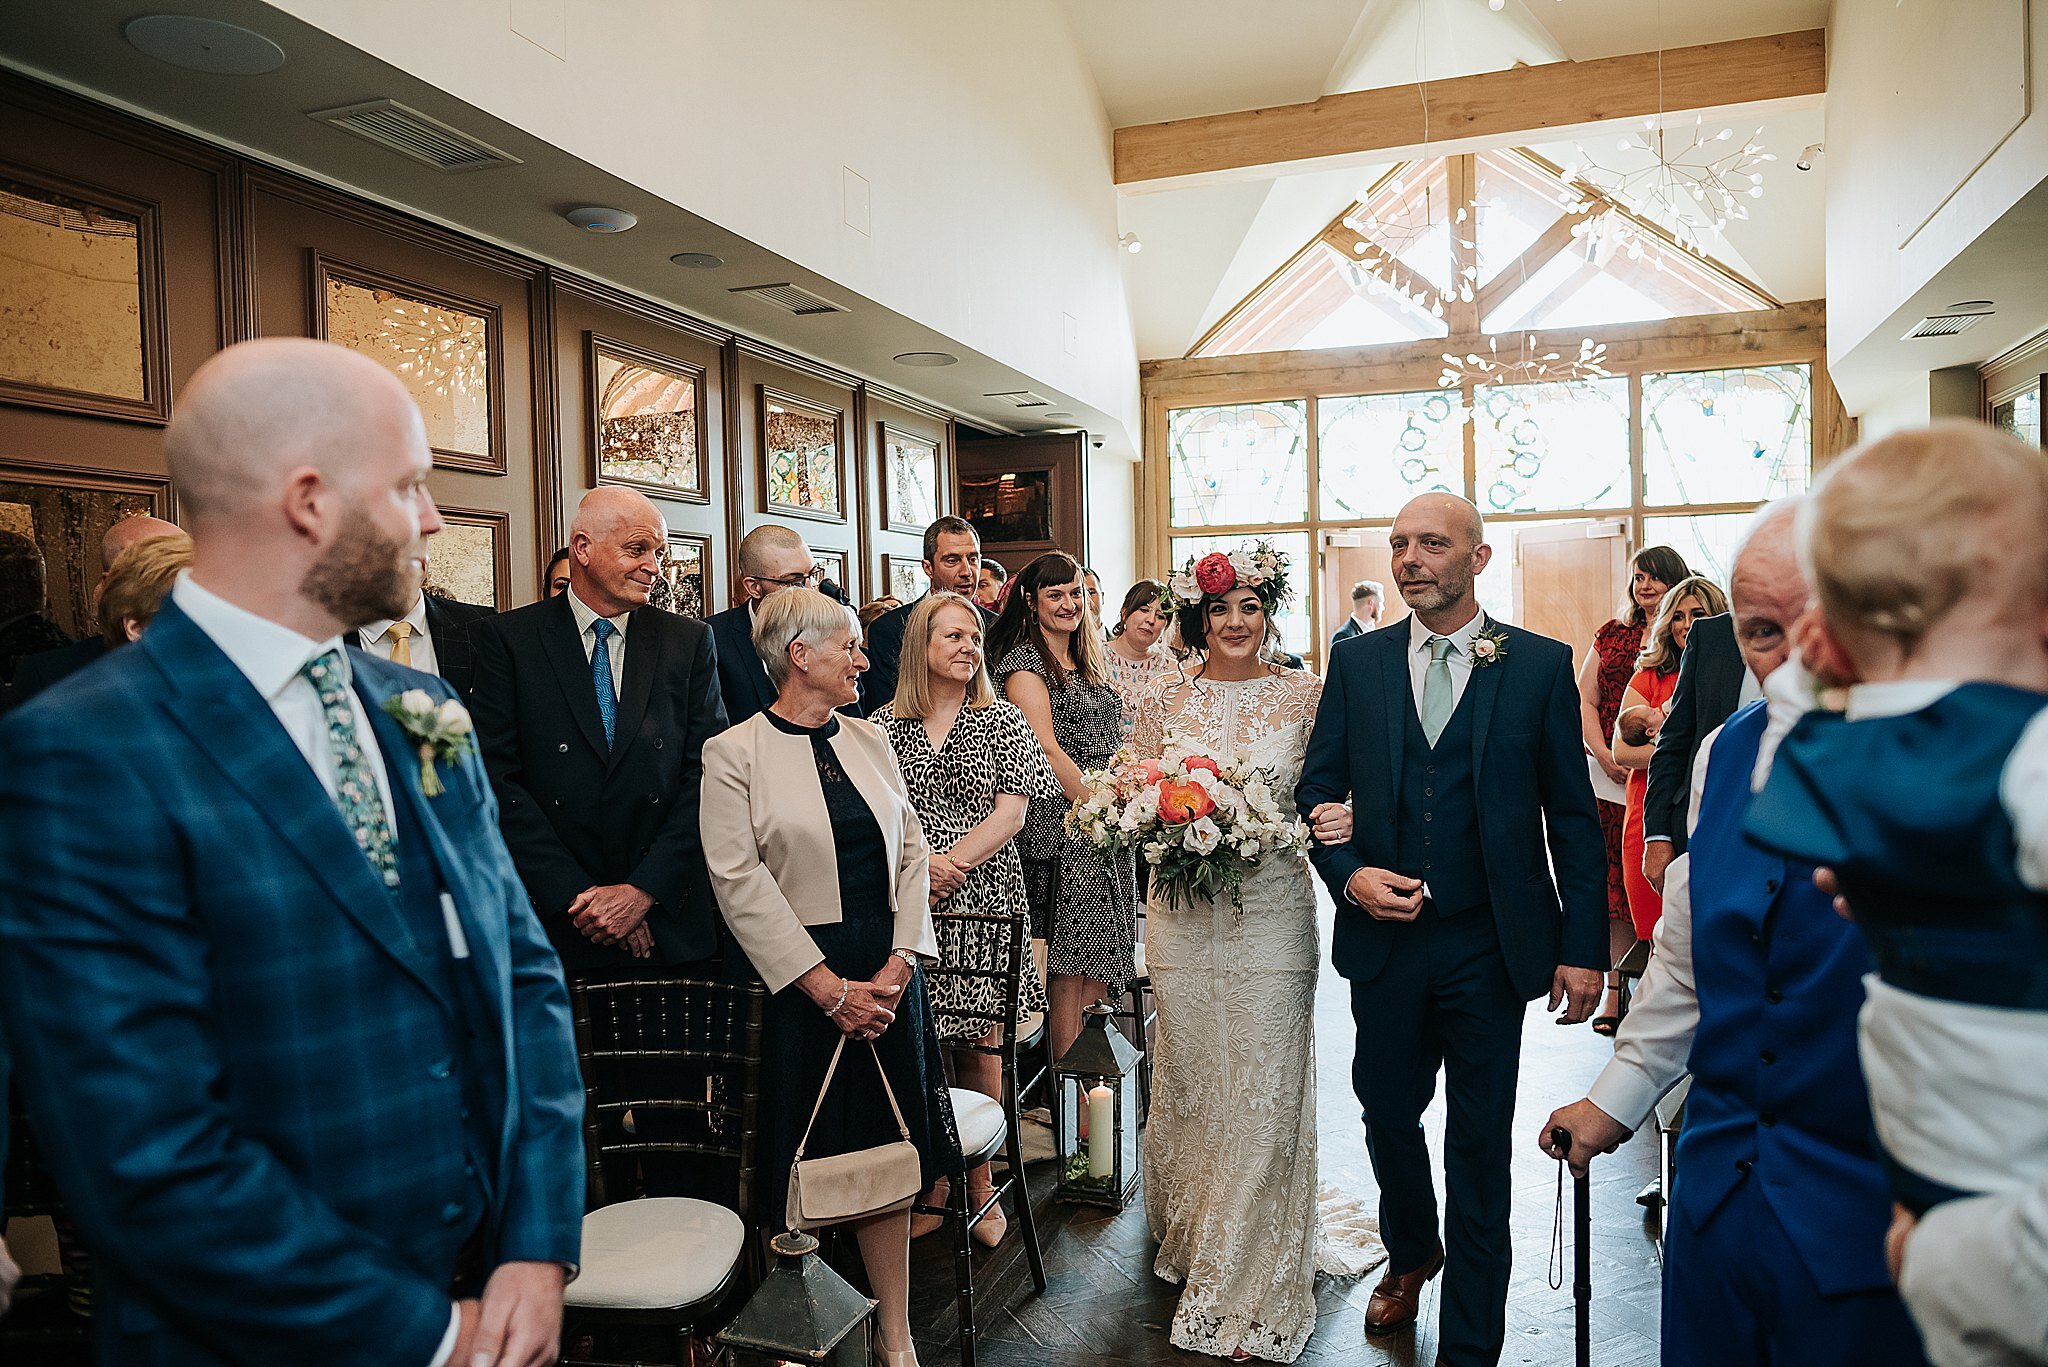 Summer wedding at the manor house, lindley, huddersfield